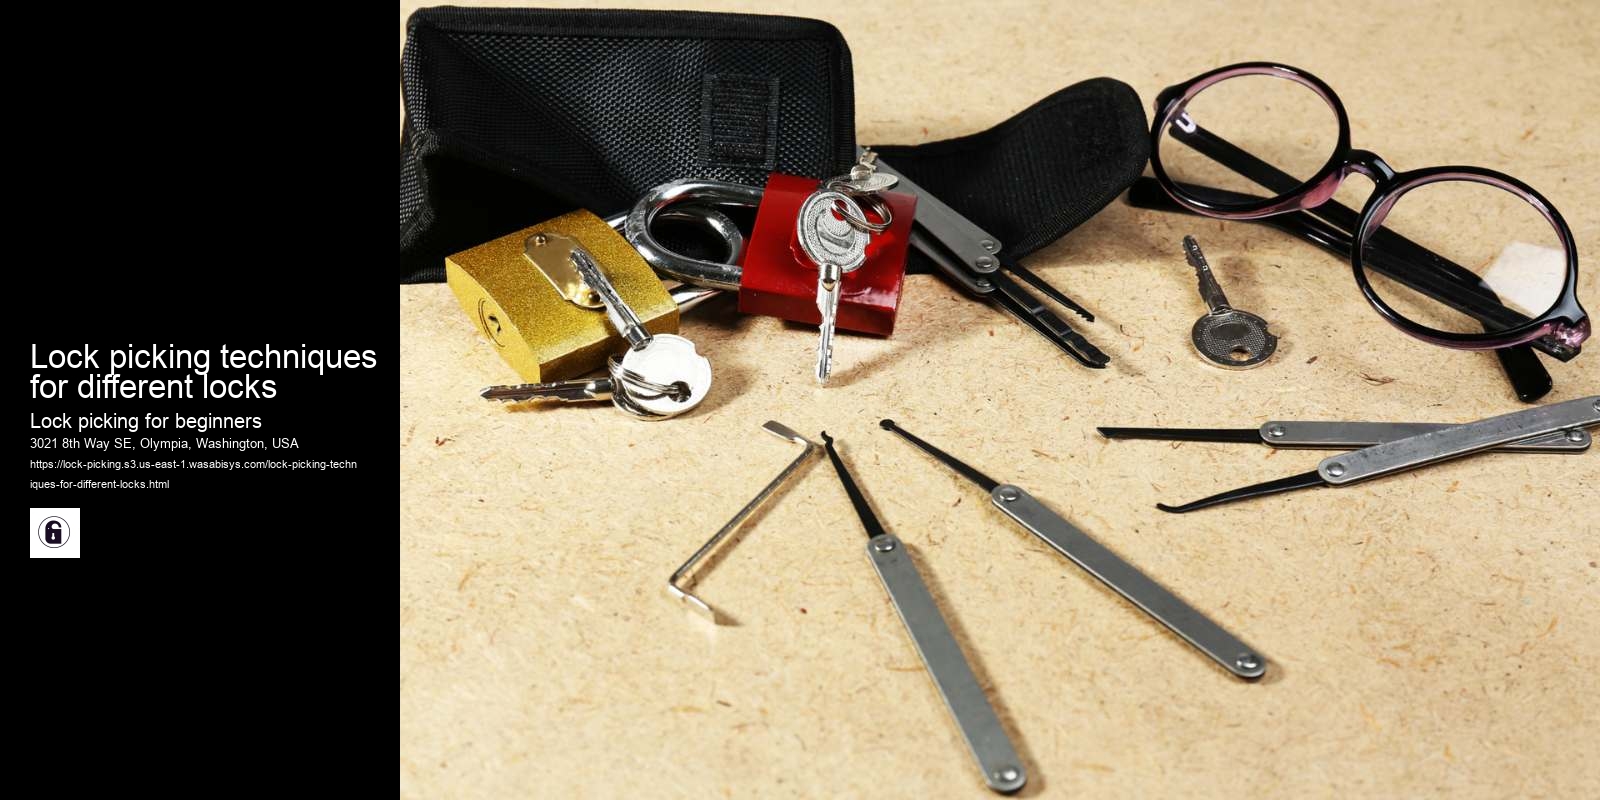 Lock picking techniques for different locks